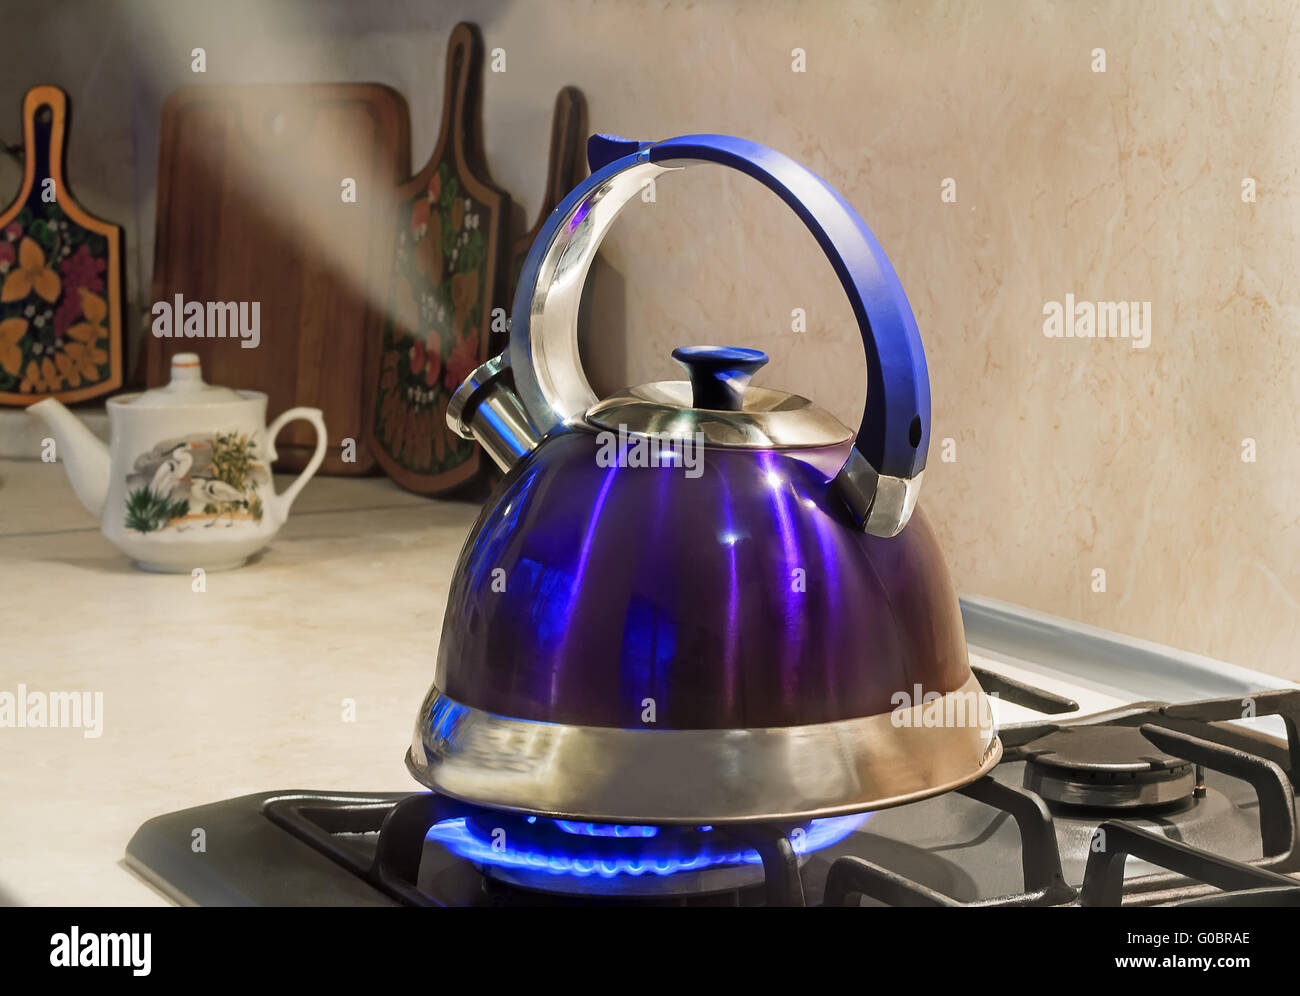 https://c8.alamy.com/comp/G0BRAE/kettle-of-boiling-water-on-the-flame-of-the-gas-st-G0BRAE.jpg